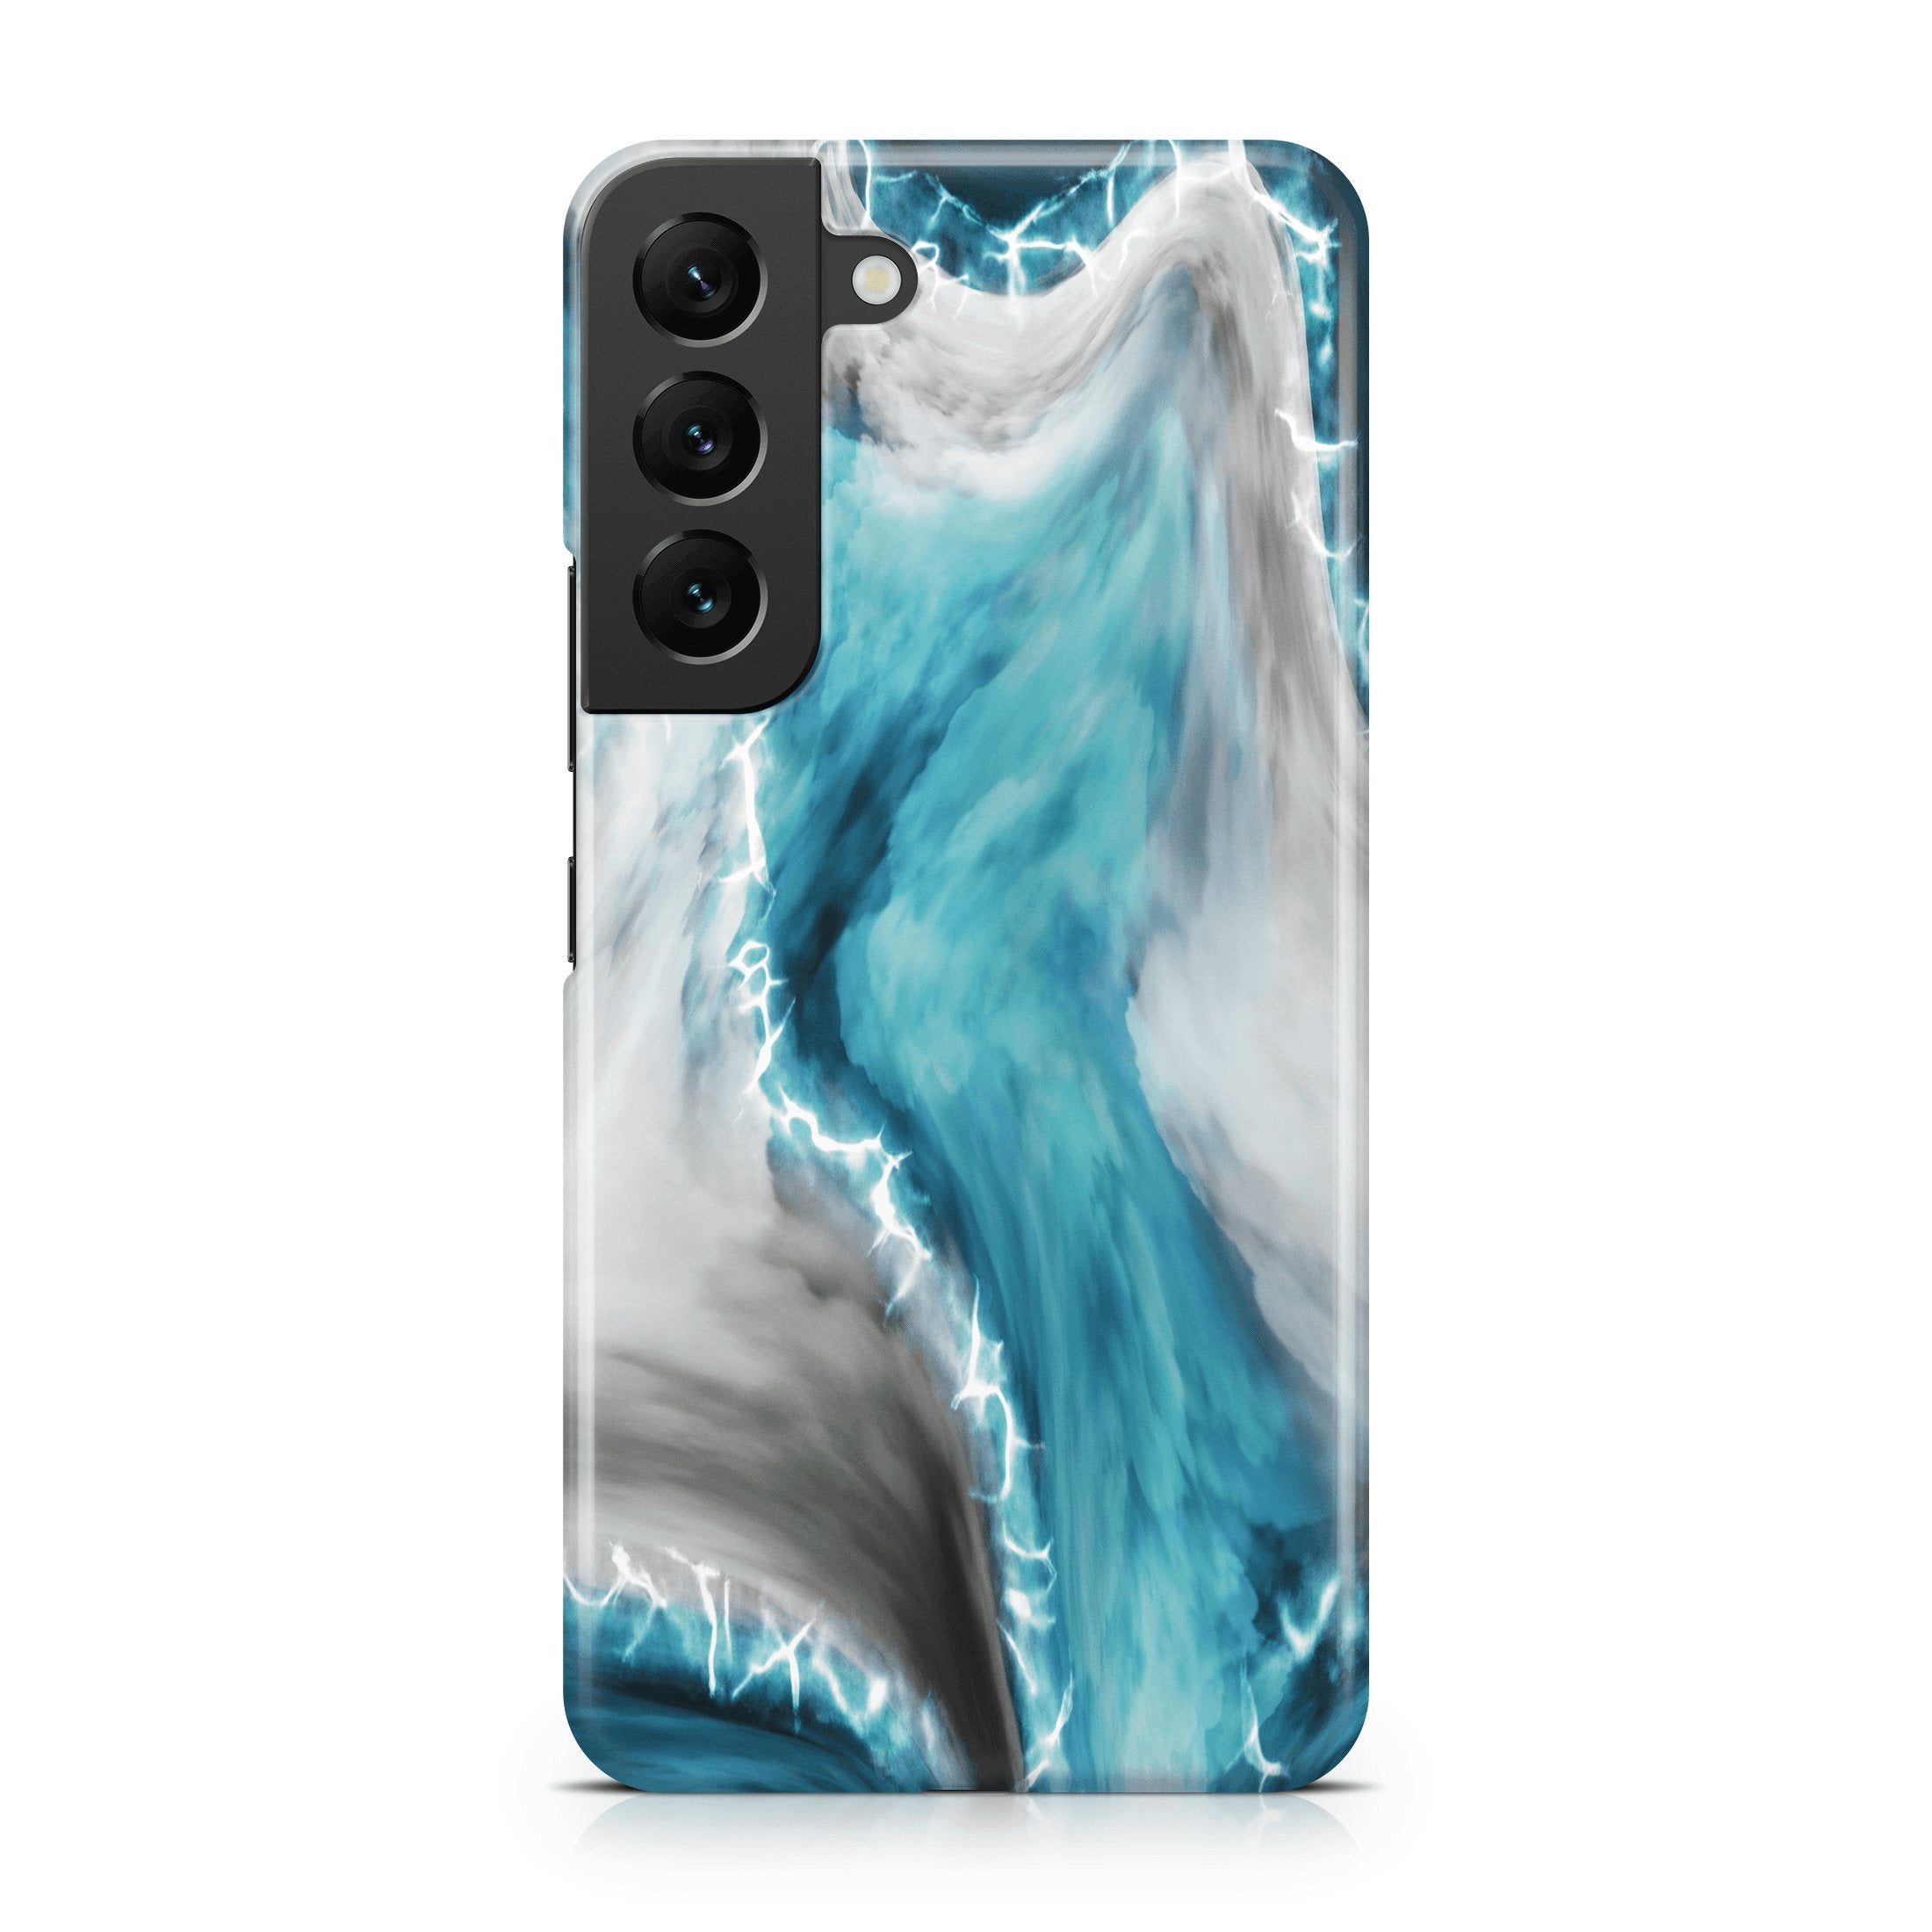 Cracked Ice - Samsung phone case designs by CaseSwagger